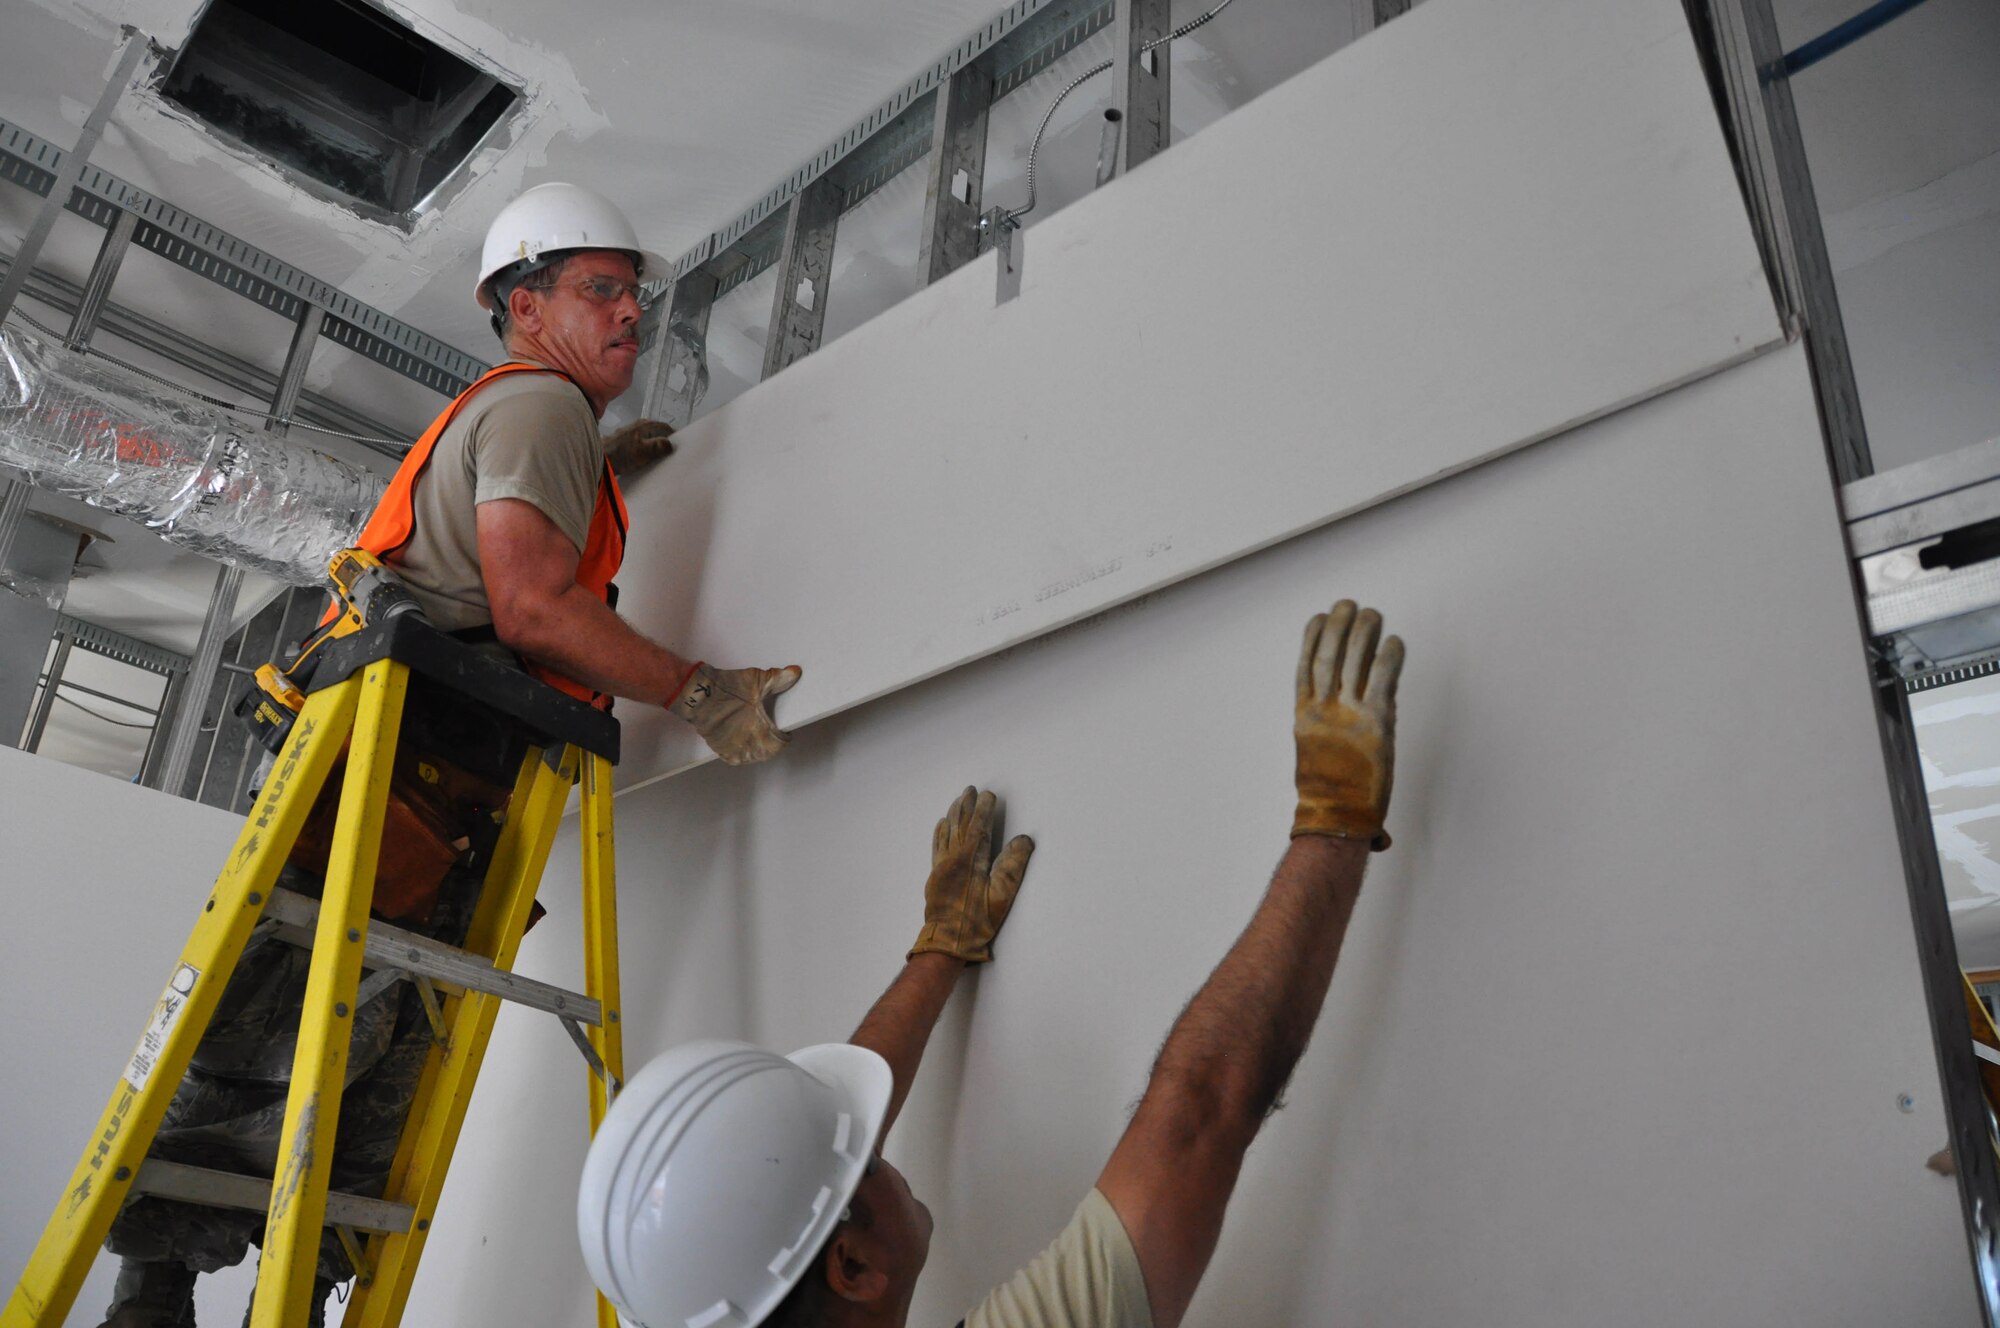 MSgt Rikey Meranda and TSgt Eduardo Ramos, 583rd RED HORSE, install sheetrock while deployed to Fletcher Field Miss. MSgt Meranda served as the safety NCO during the deployment and successfully managed to prevent any mishaps during the two week project. (U.S. Air Force Photo by Capt Joe Simms)